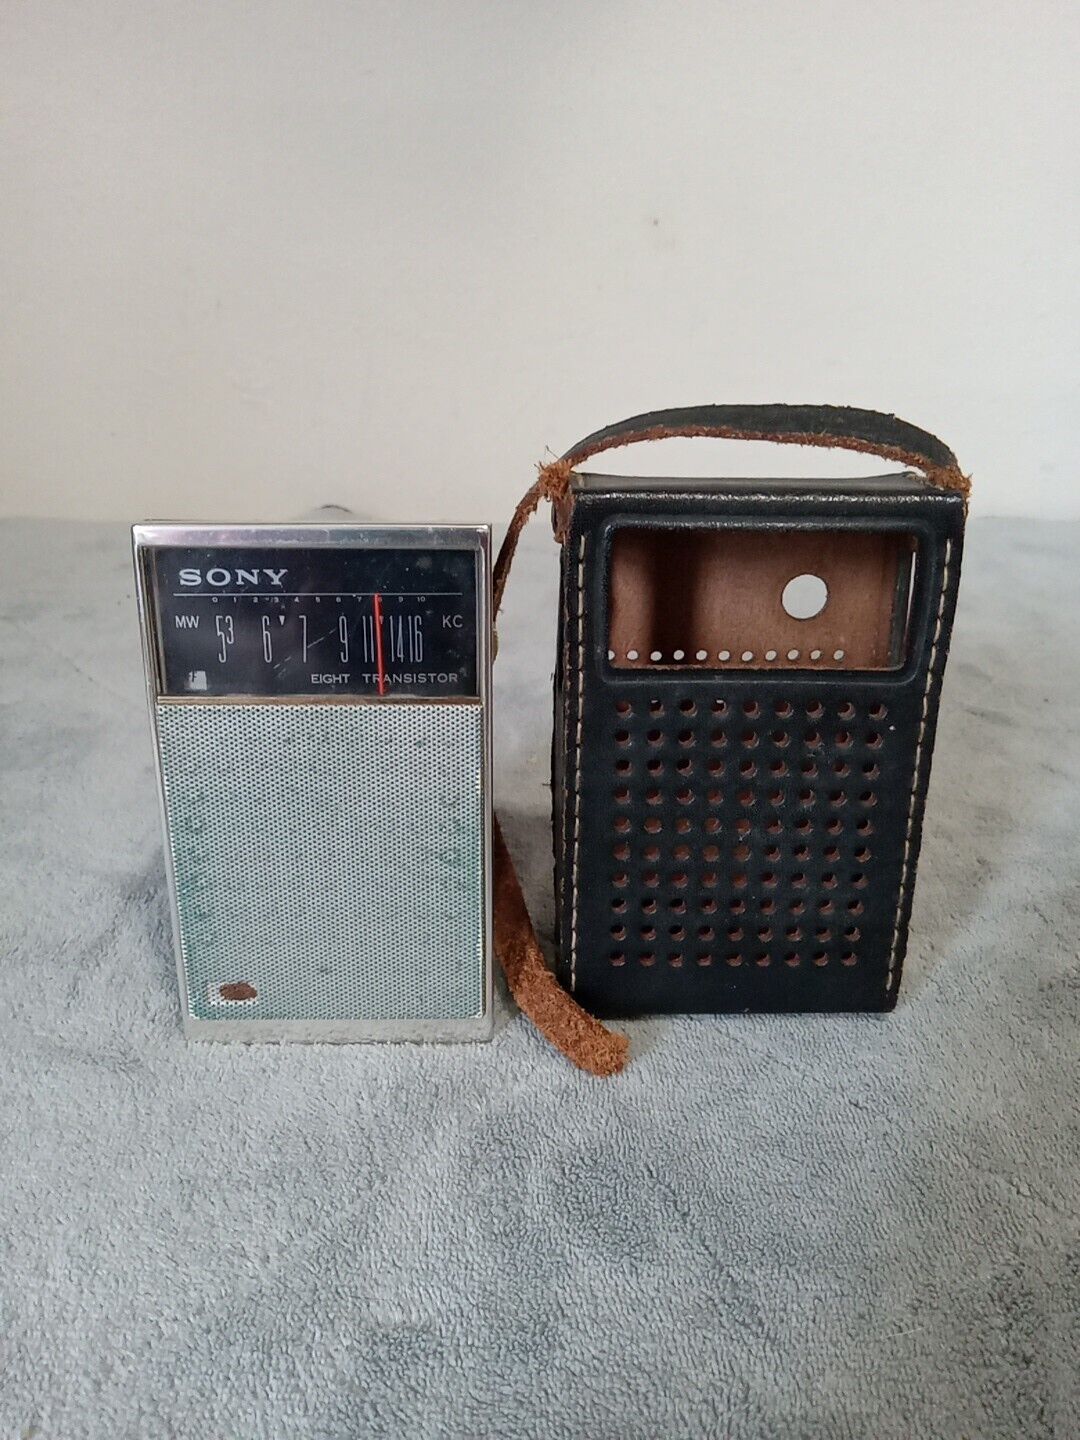 Vintage SONY MODEL 2R-27 Eight Transistor Radio with Leather Case Tested Works